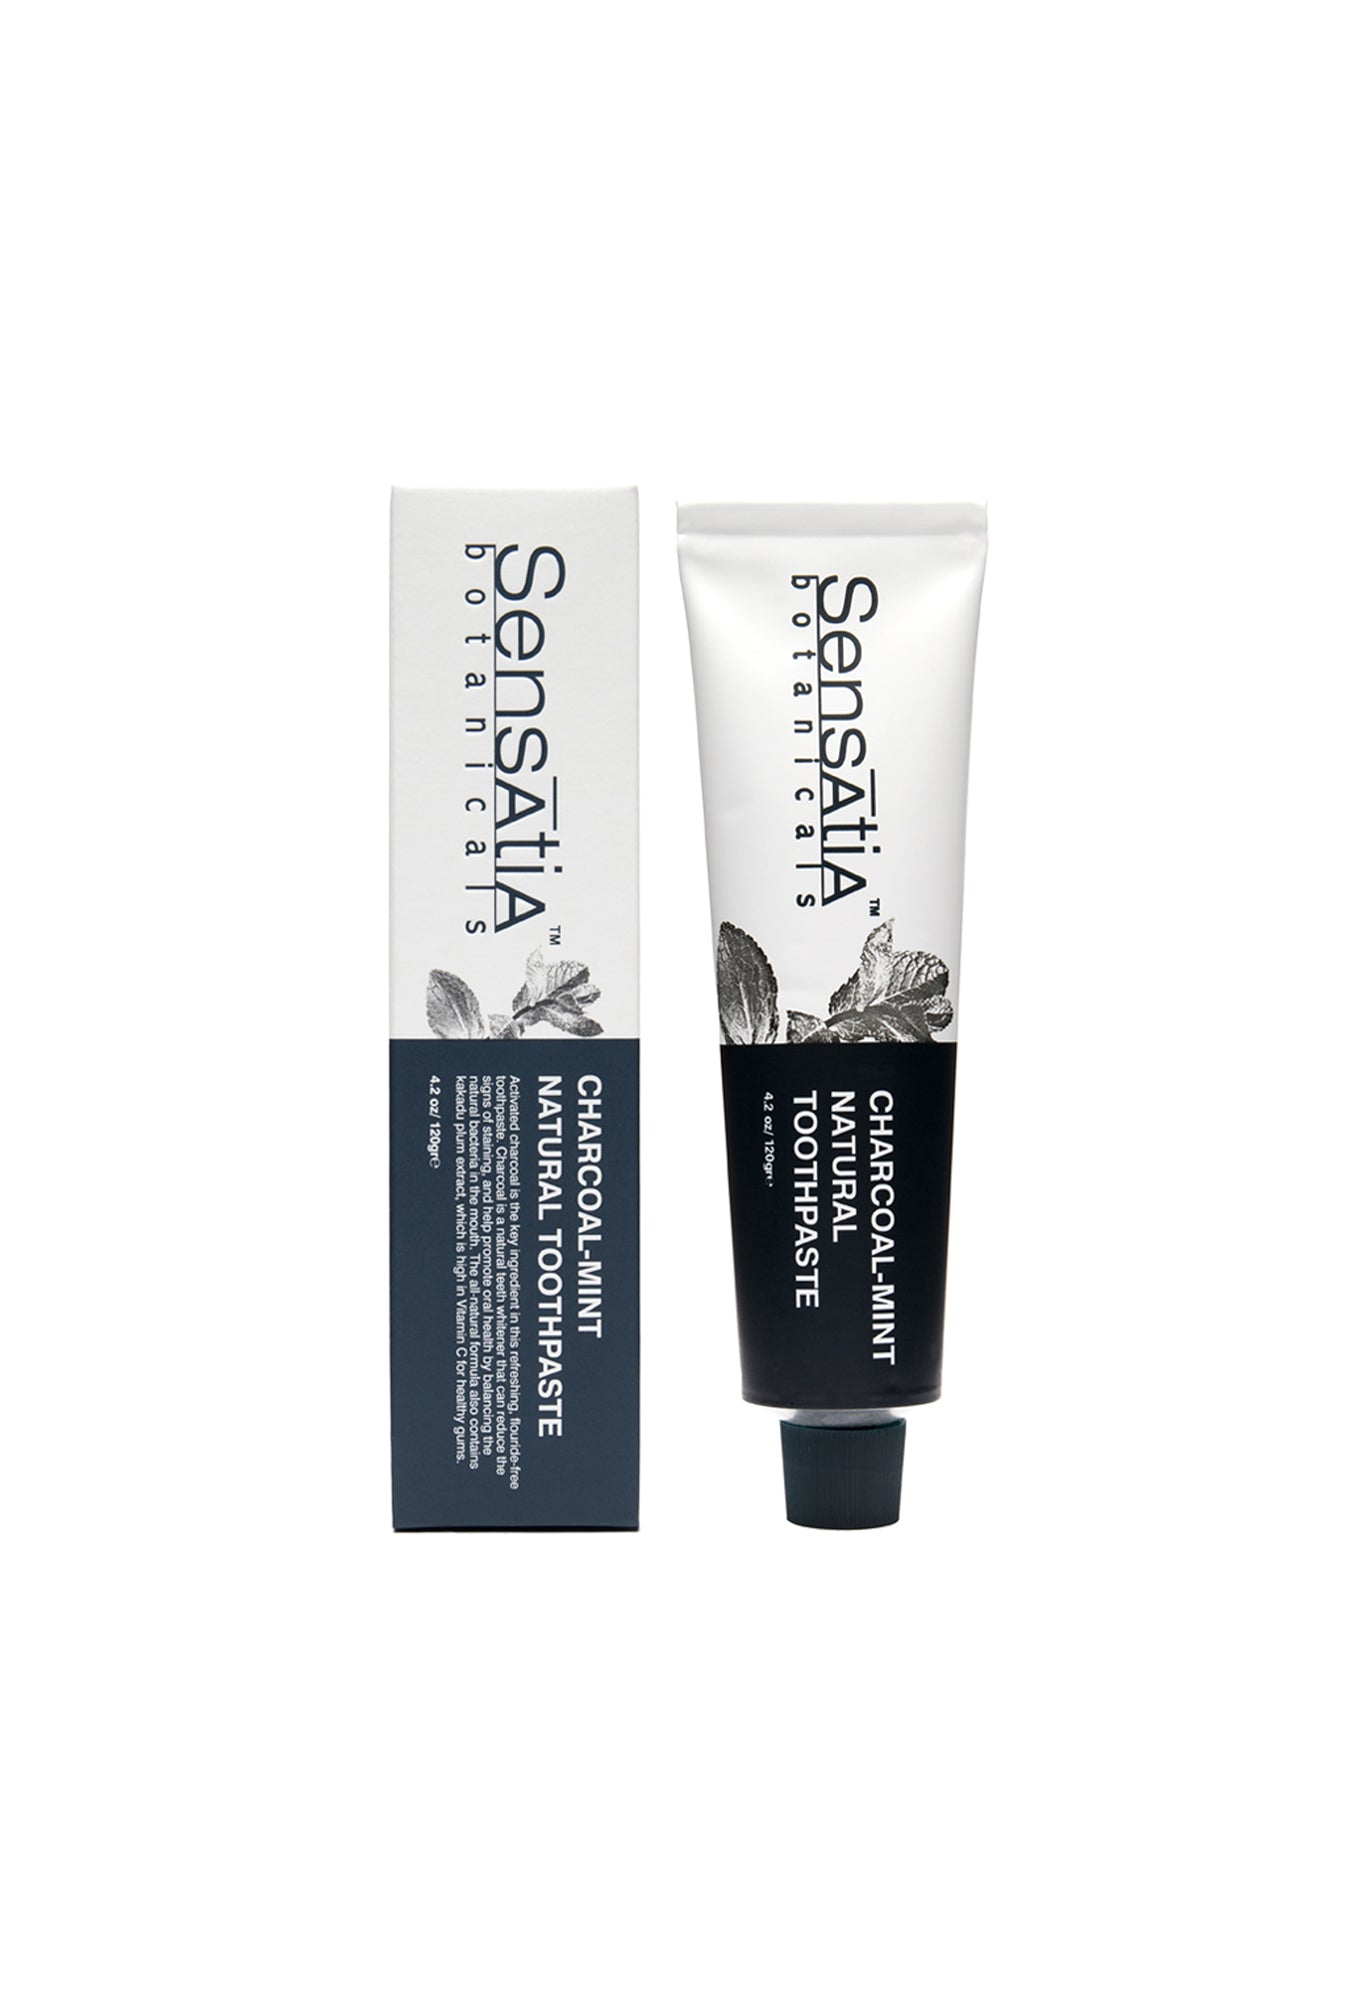 Charcoal-Mint Natural Toothpaste